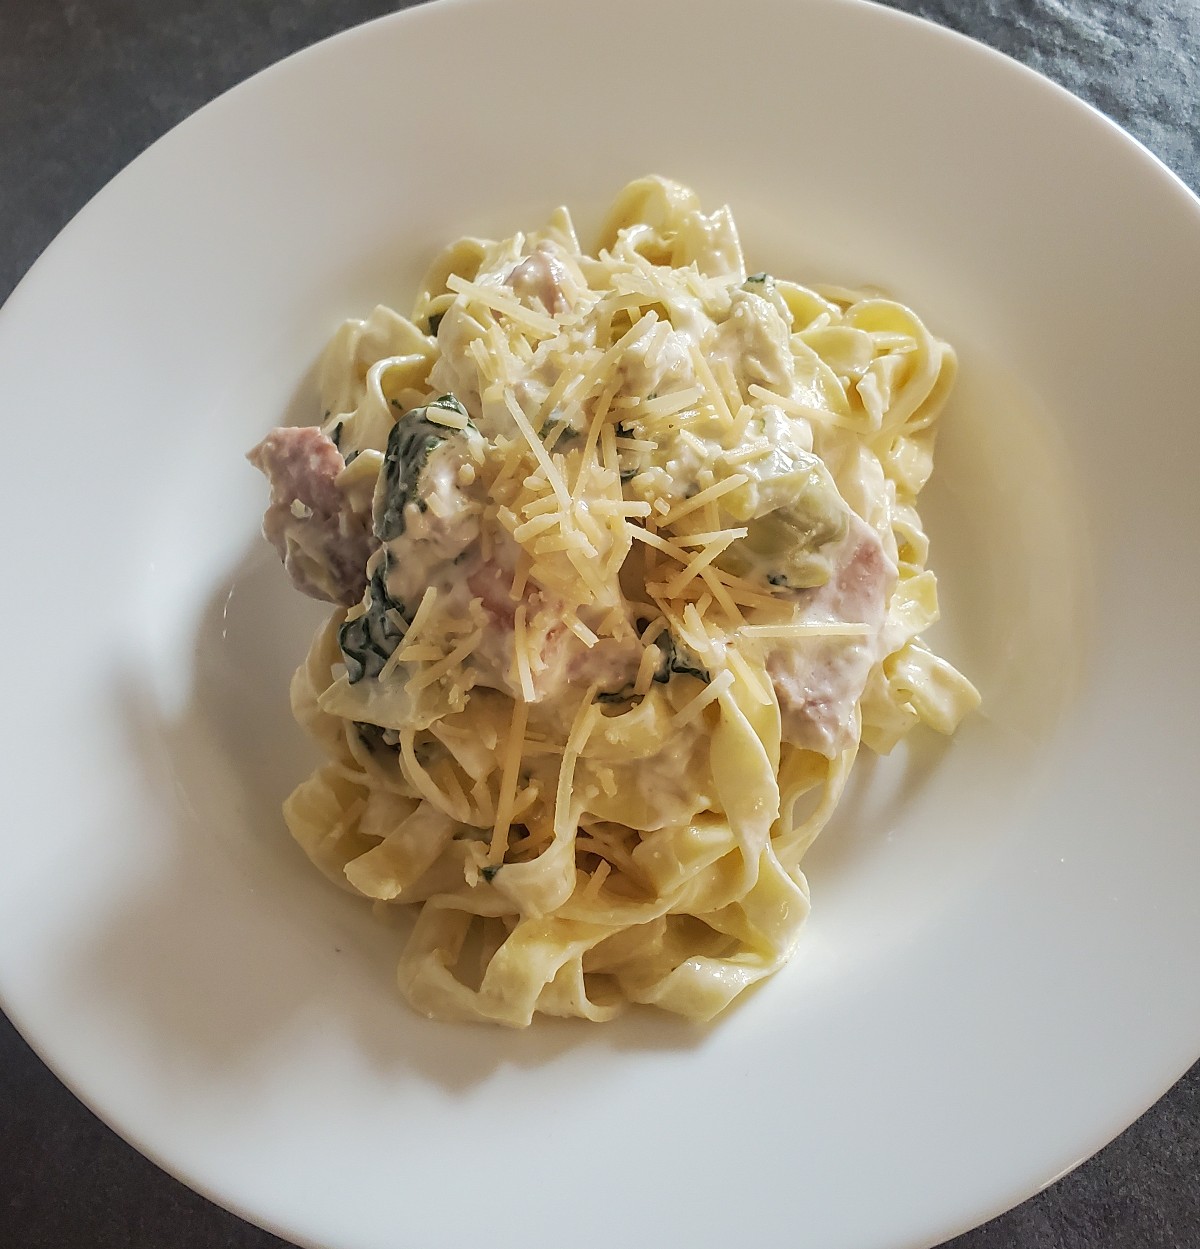 Spinach and artichoke pasta recipe from cleveland cooking